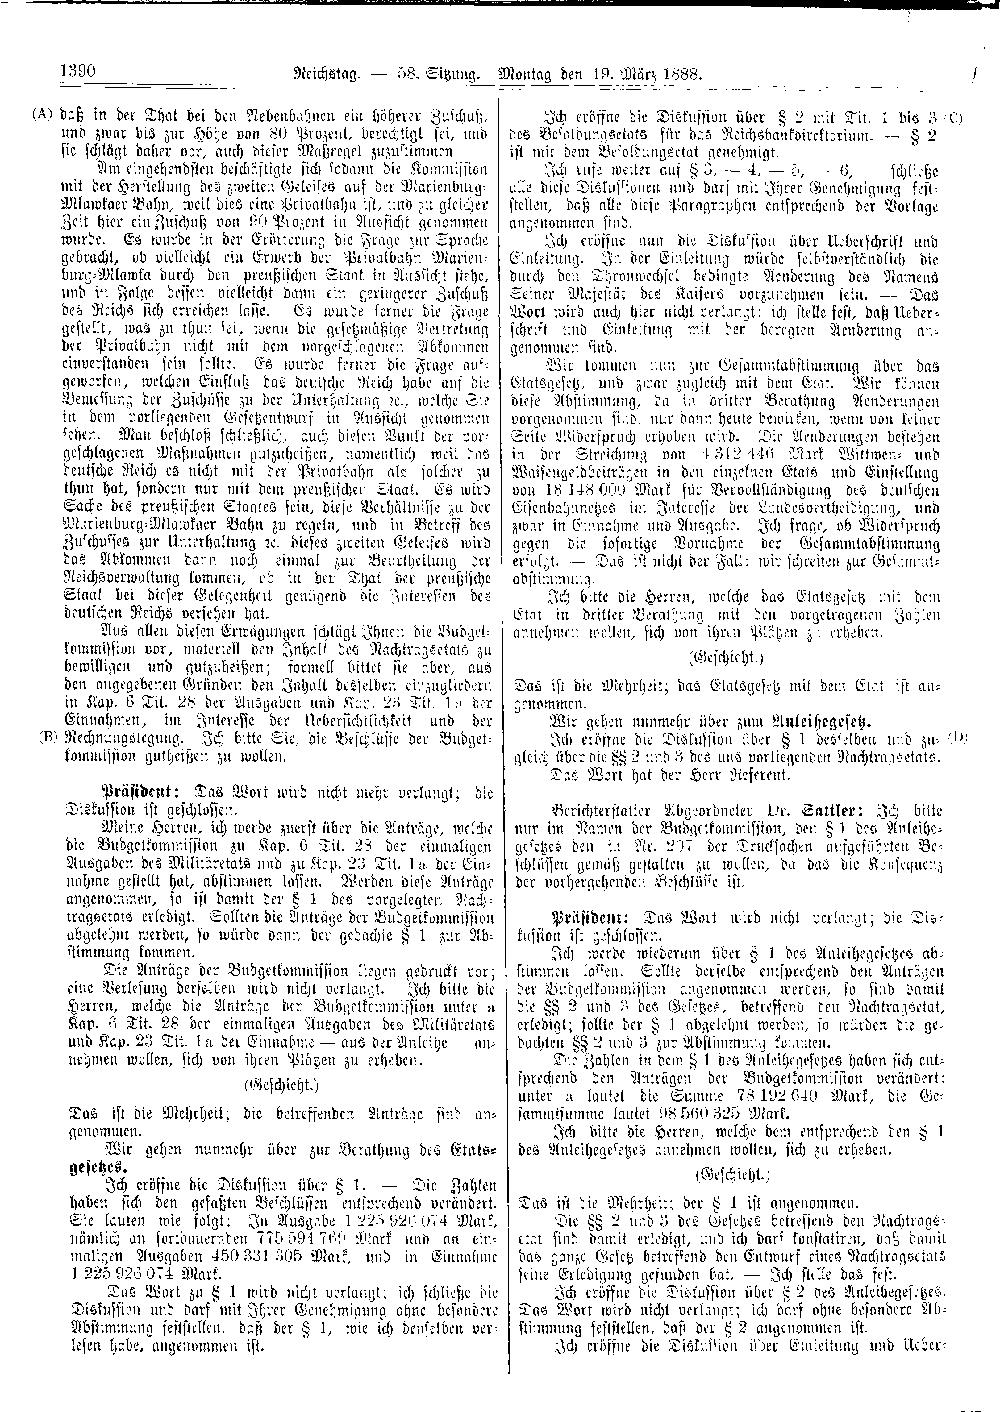 Scan of page 1390